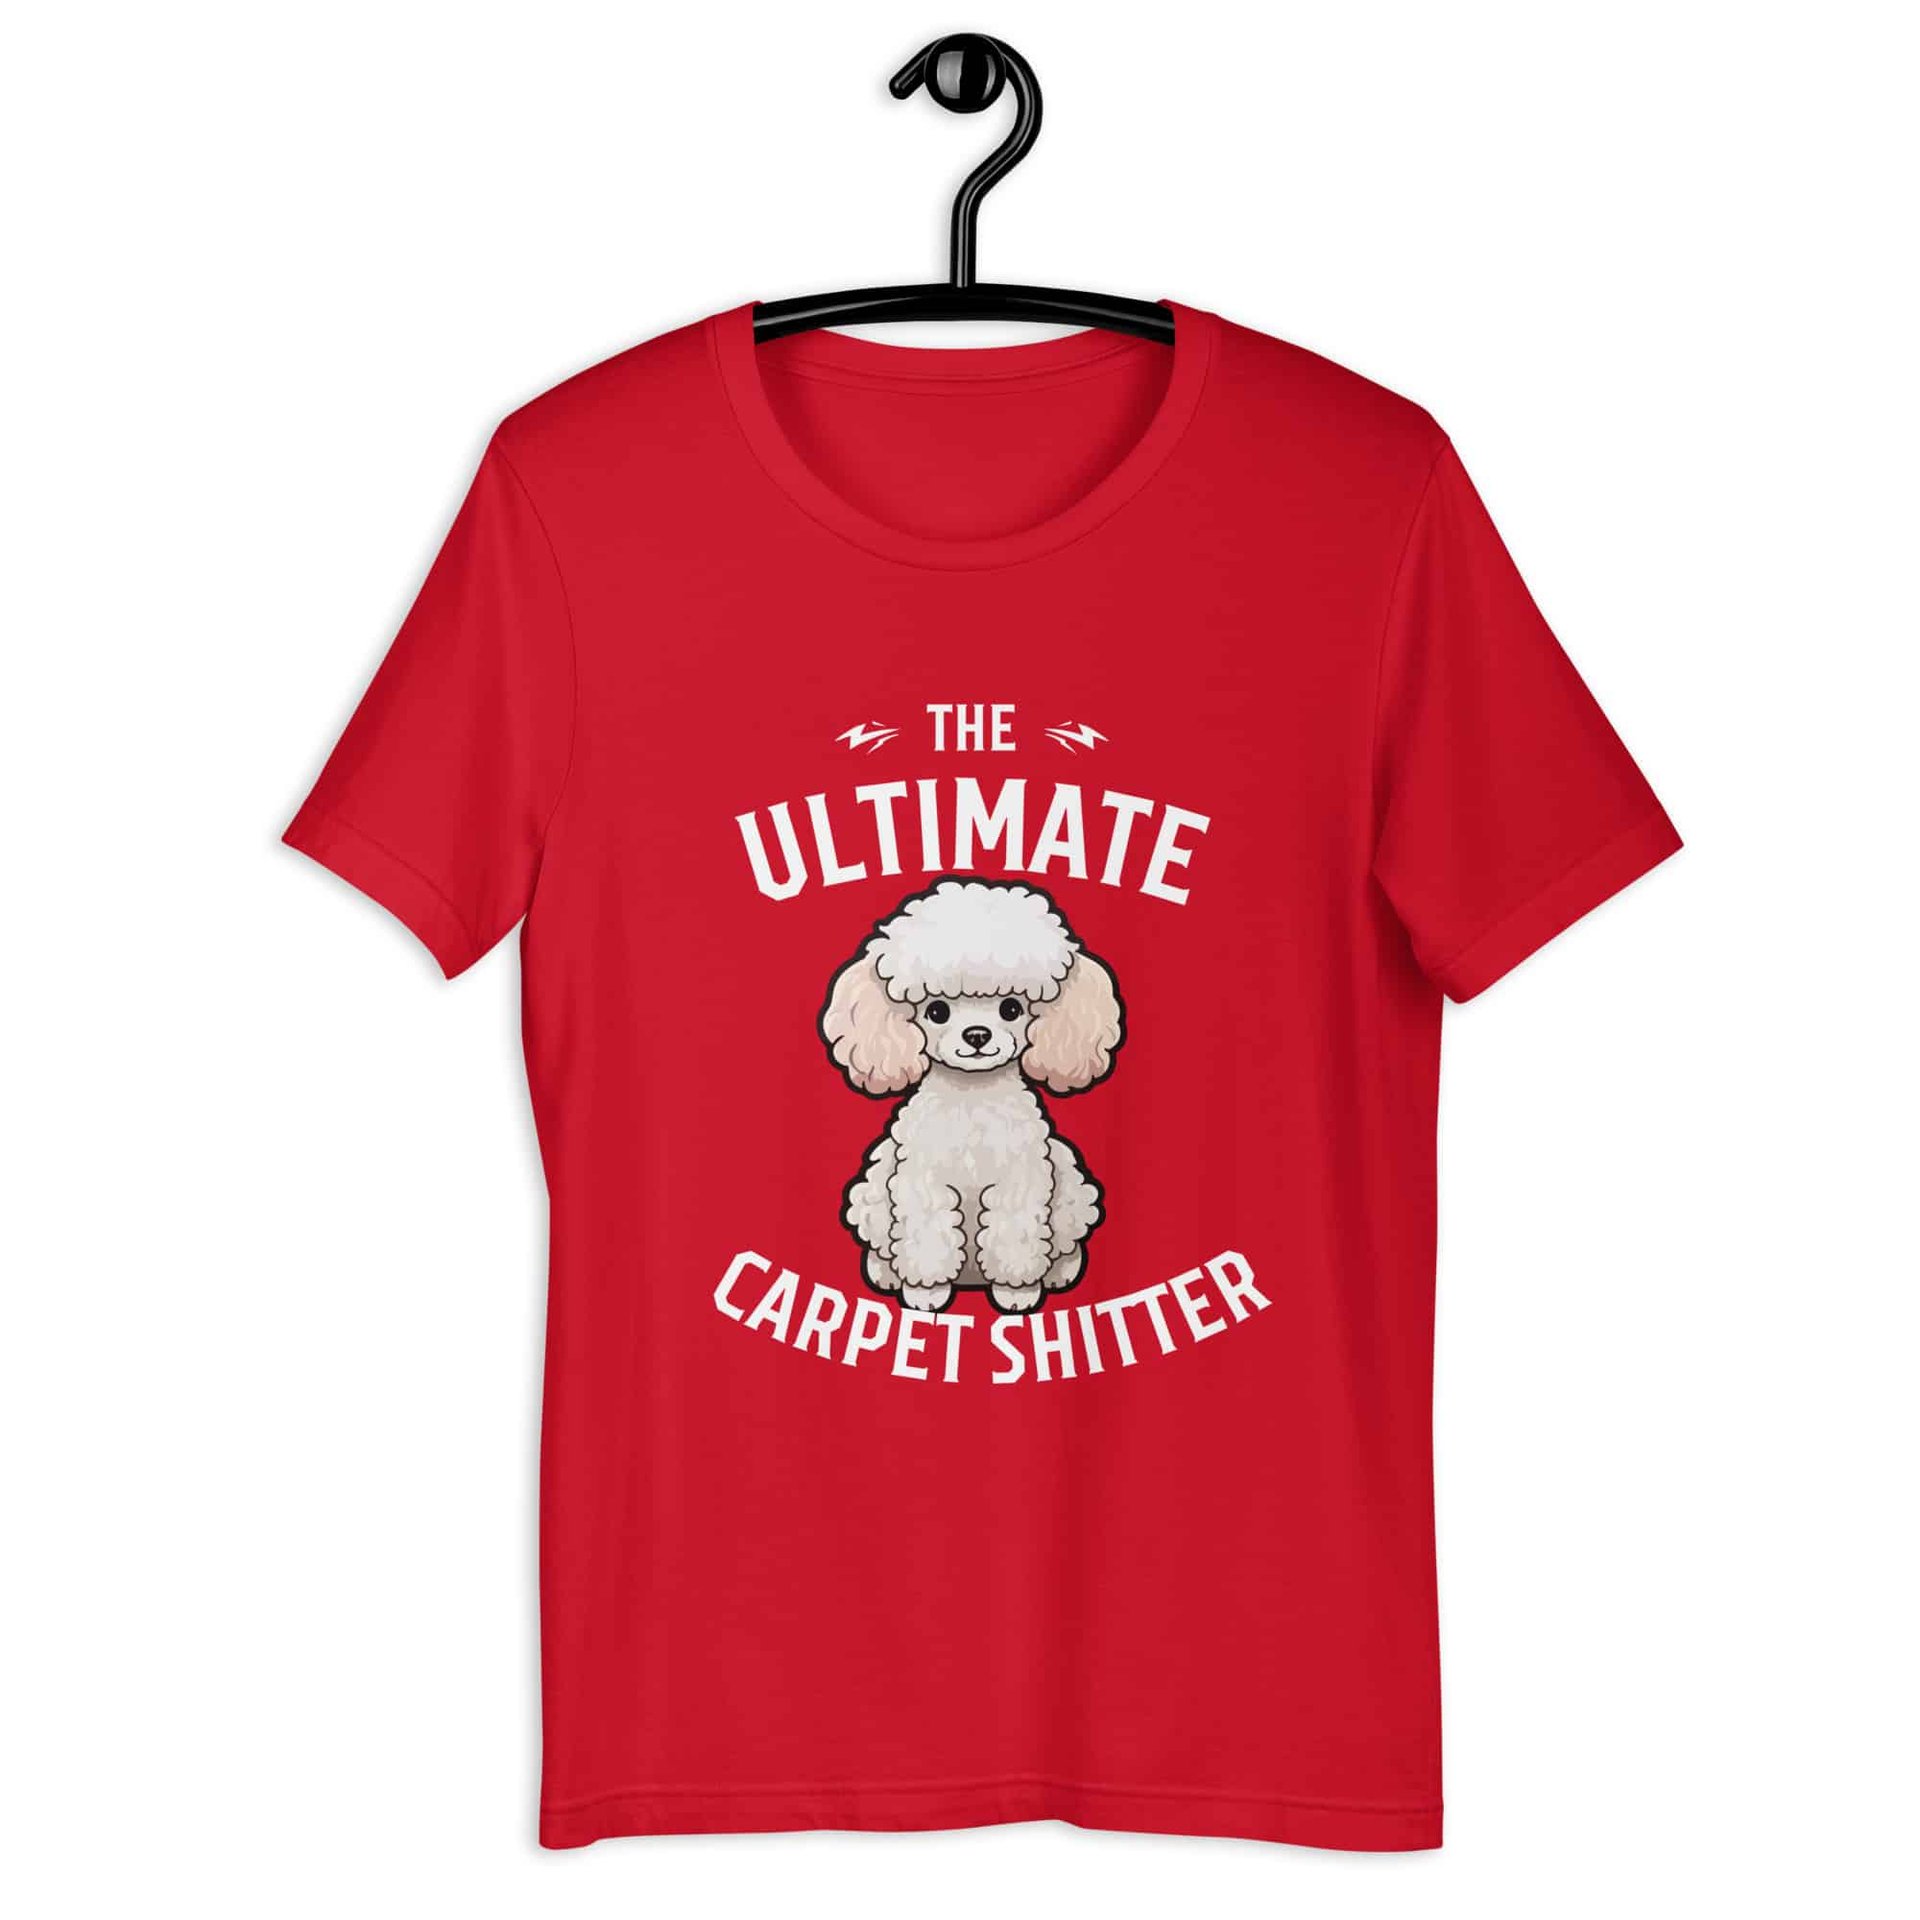 The Ultimate Carpet Shitter Funny Poodle Unisex T-Shirt red